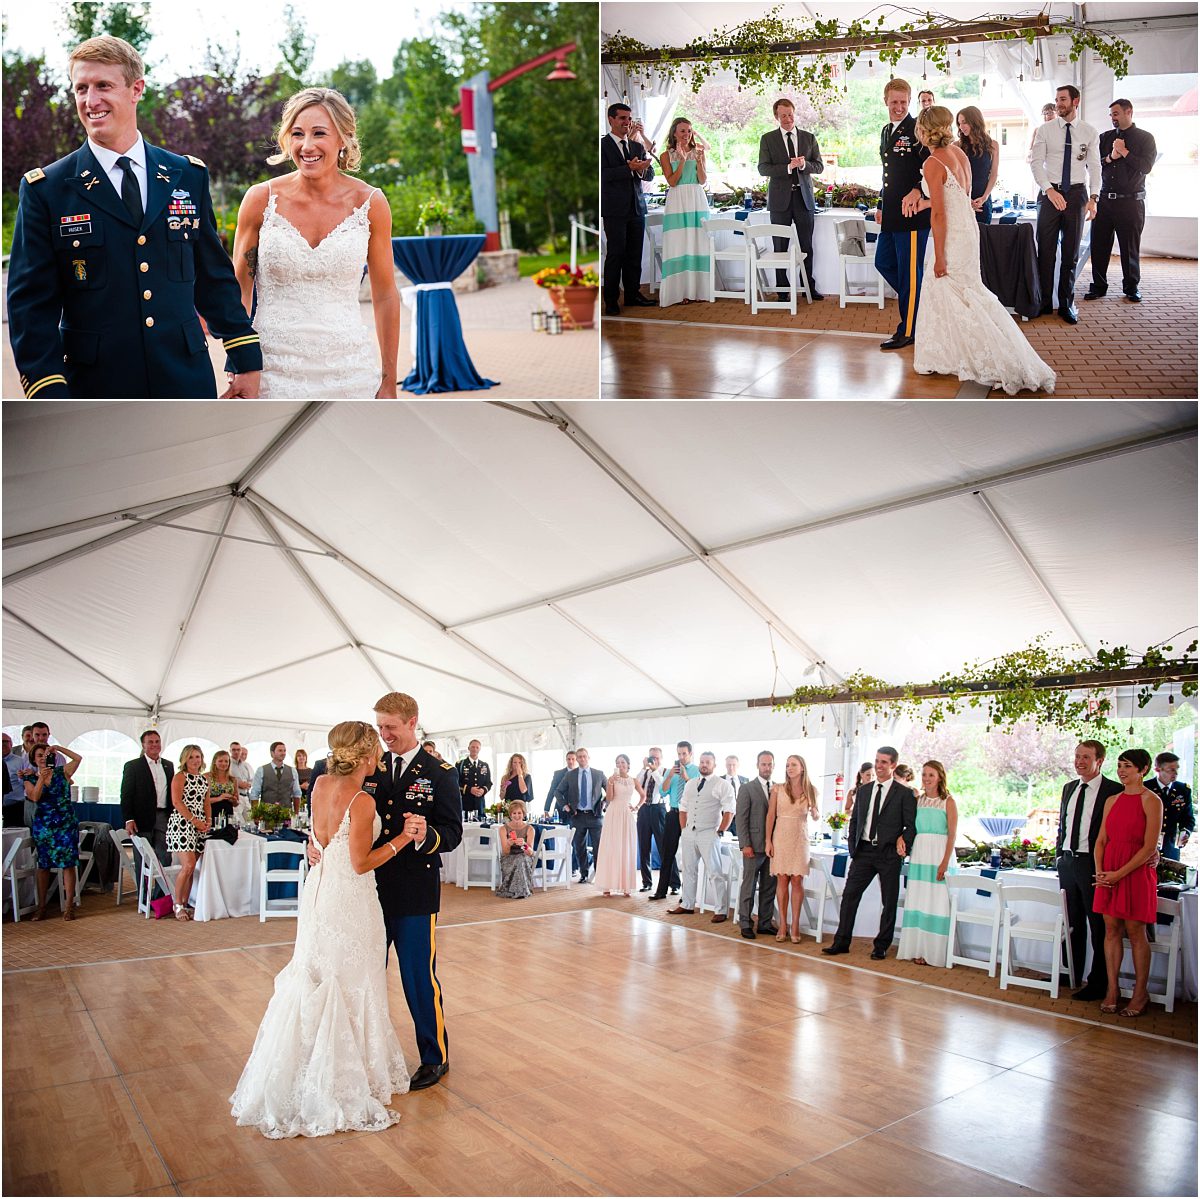 grand entrance, wedding reception, first dance, tented reception space, steamboat springs resort, bride and groom, military wedding, dress blues, colorado wedding photographer, mountain wedding photographer